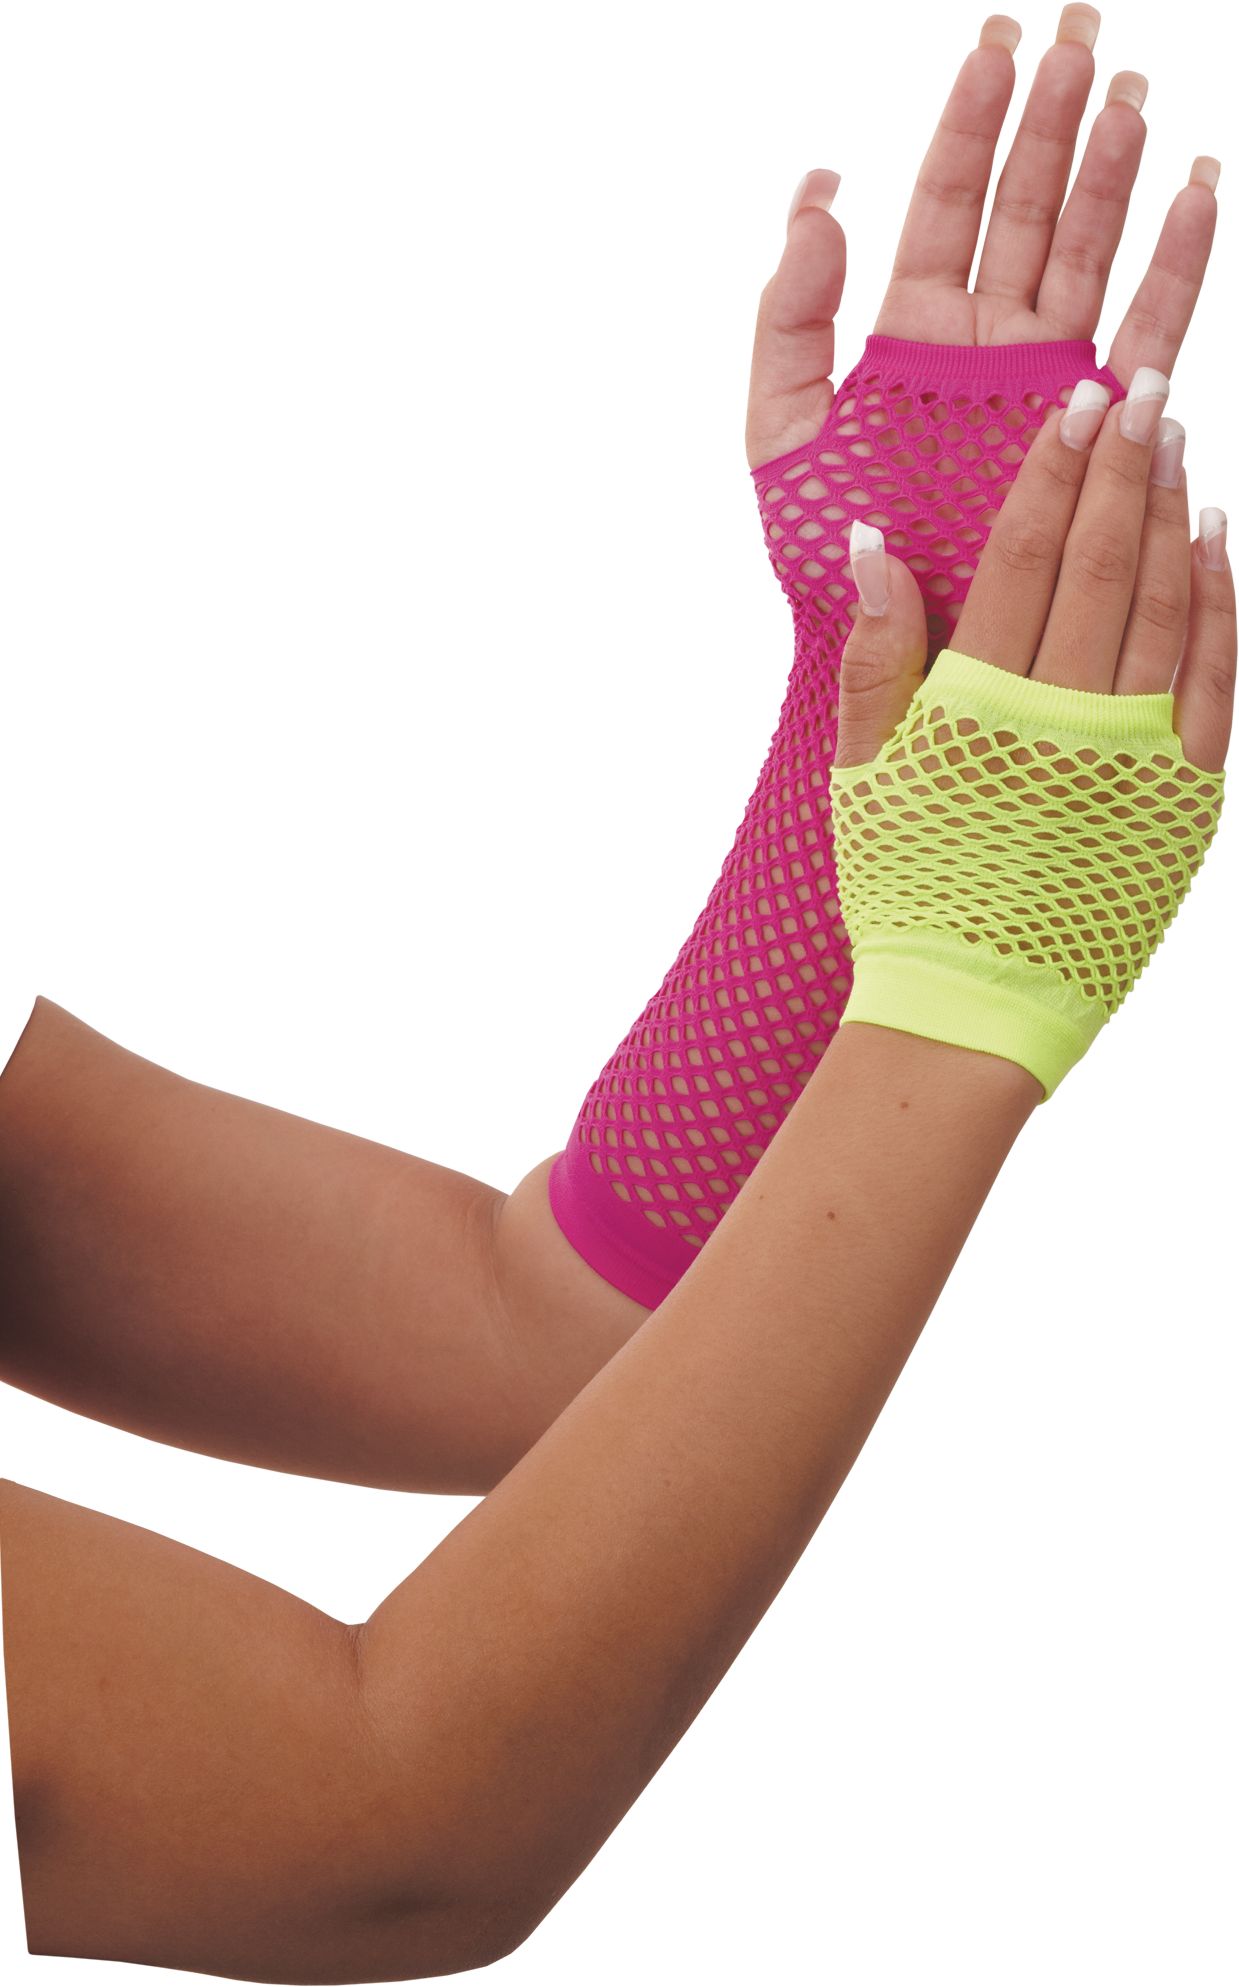 Adult 1980s Neon Fingerless Fishnet Gloves, Yellow/Pink, One Size